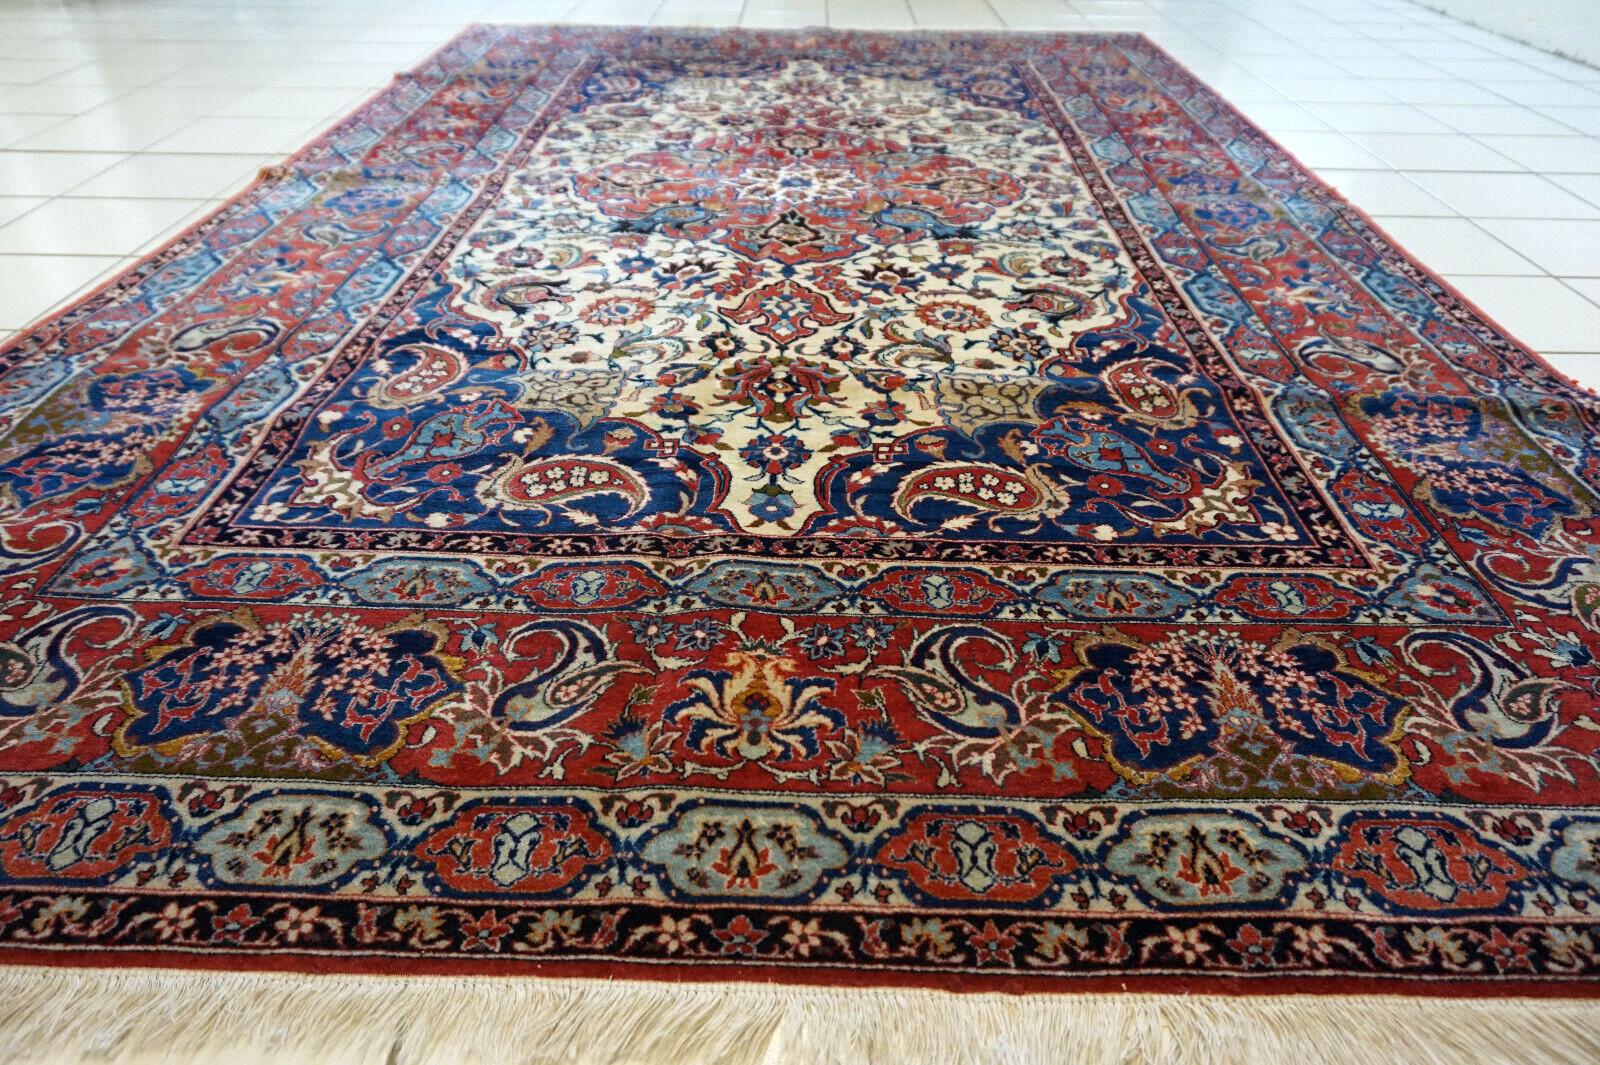 Handmade Antique Persian Style Isfahan Rug 4.5' x 7.7', 1920s - 1D53 In Good Condition For Sale In Bordeaux, FR